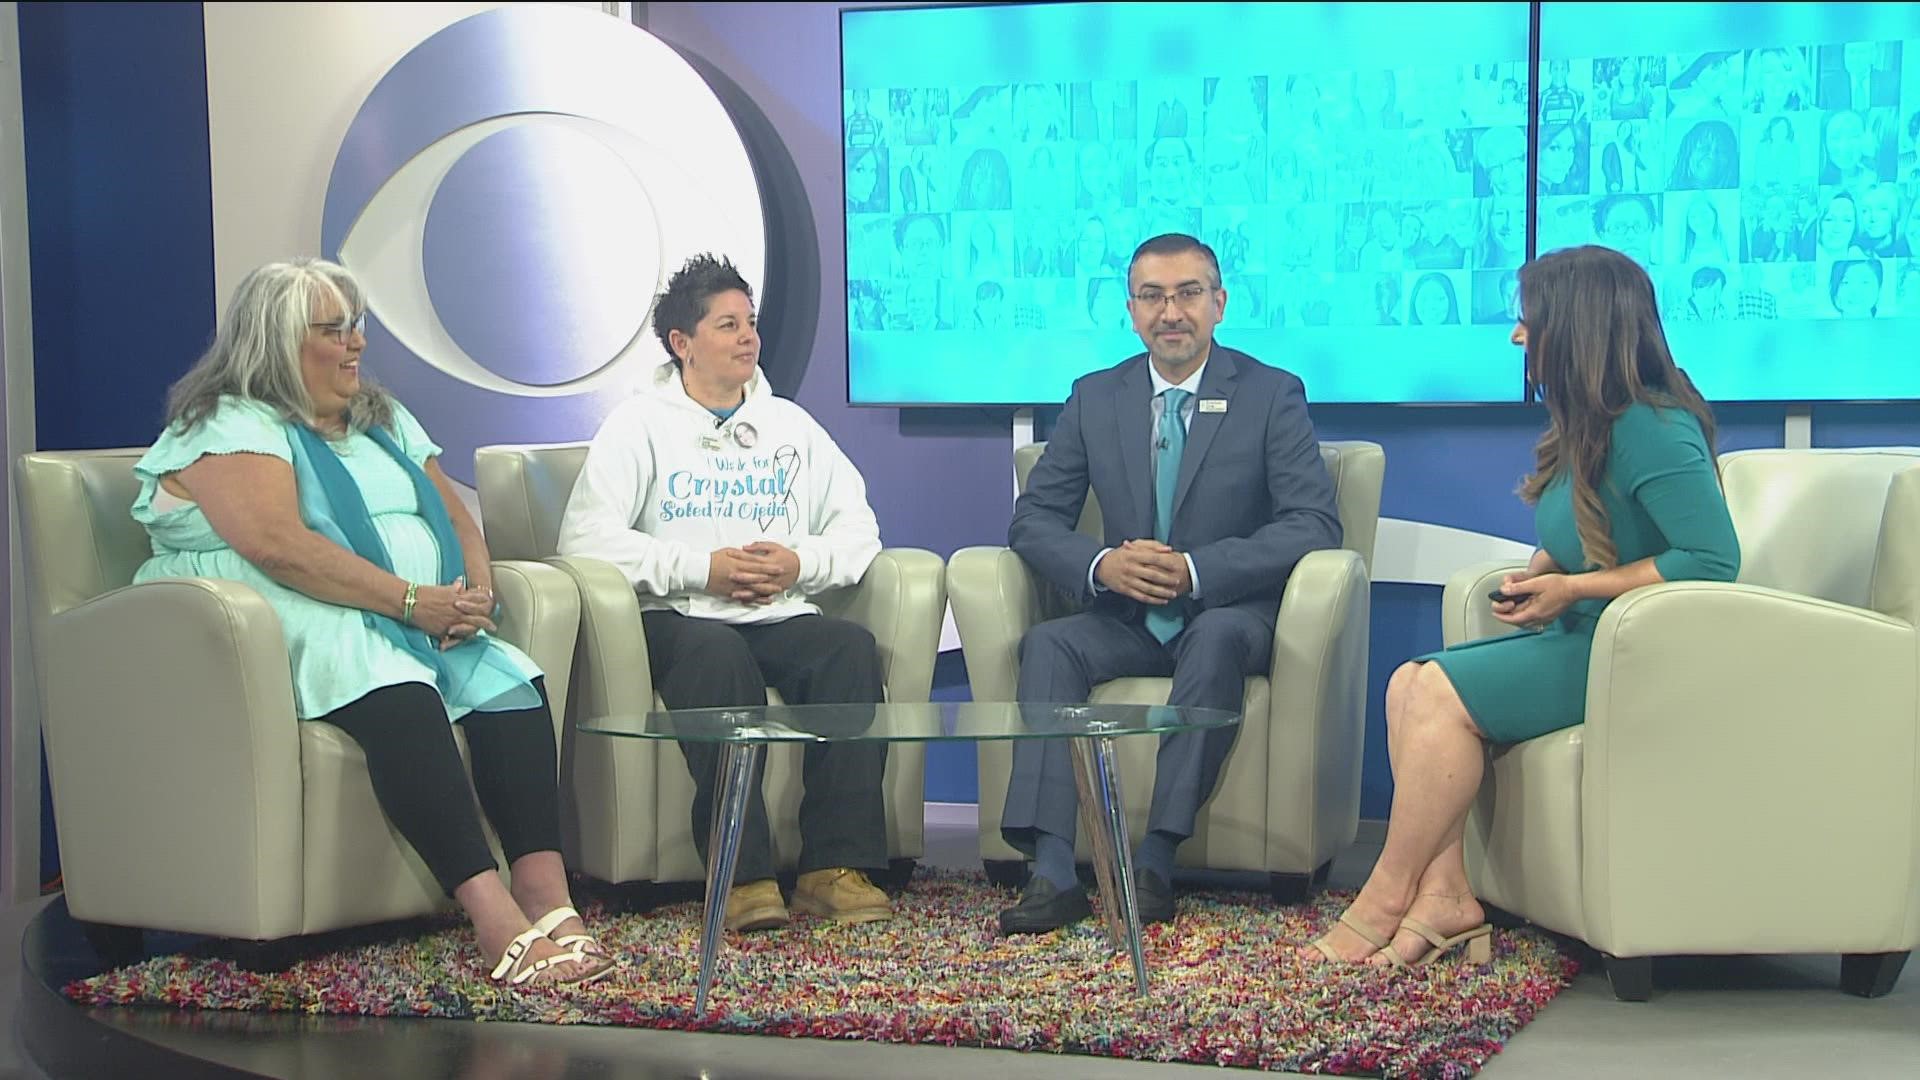 Dr. Mohammed Al-Janabi from Sharp Grossmont Hospital and Burr Heart & Lung Clinic Medical Director and Trini Pere-Ojeda and Gloria Repik talked about the initiative.